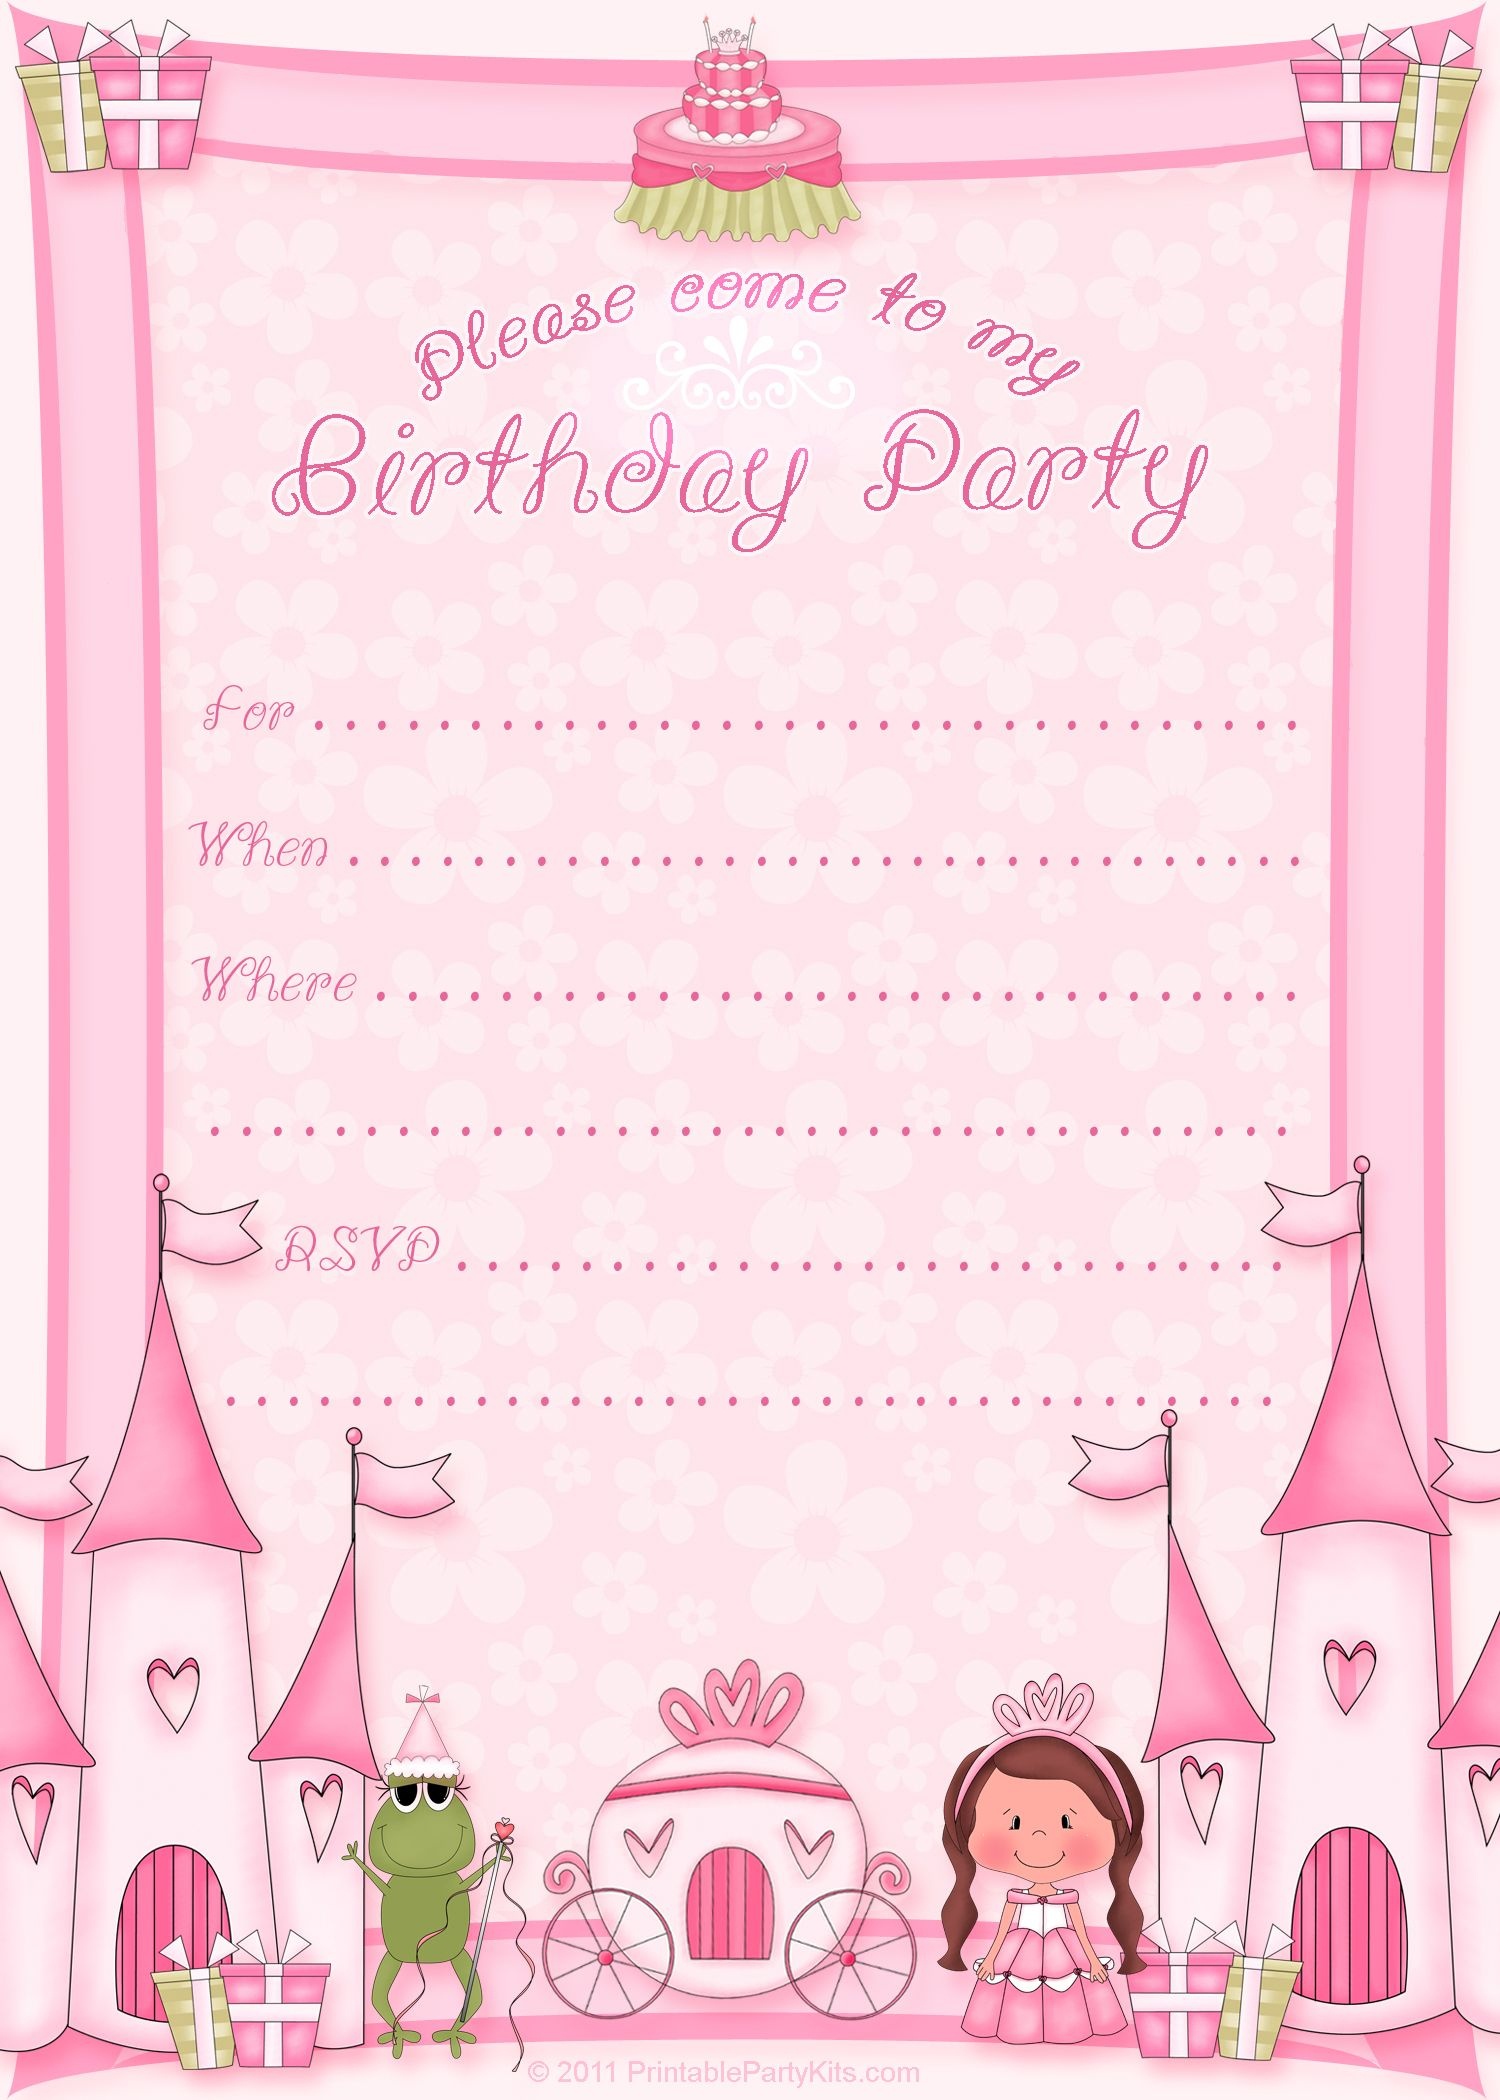 Free Printable Invitation. Pinned For Kidfolio, The Parenting Mobile - Free Printable Birthday Scrolls